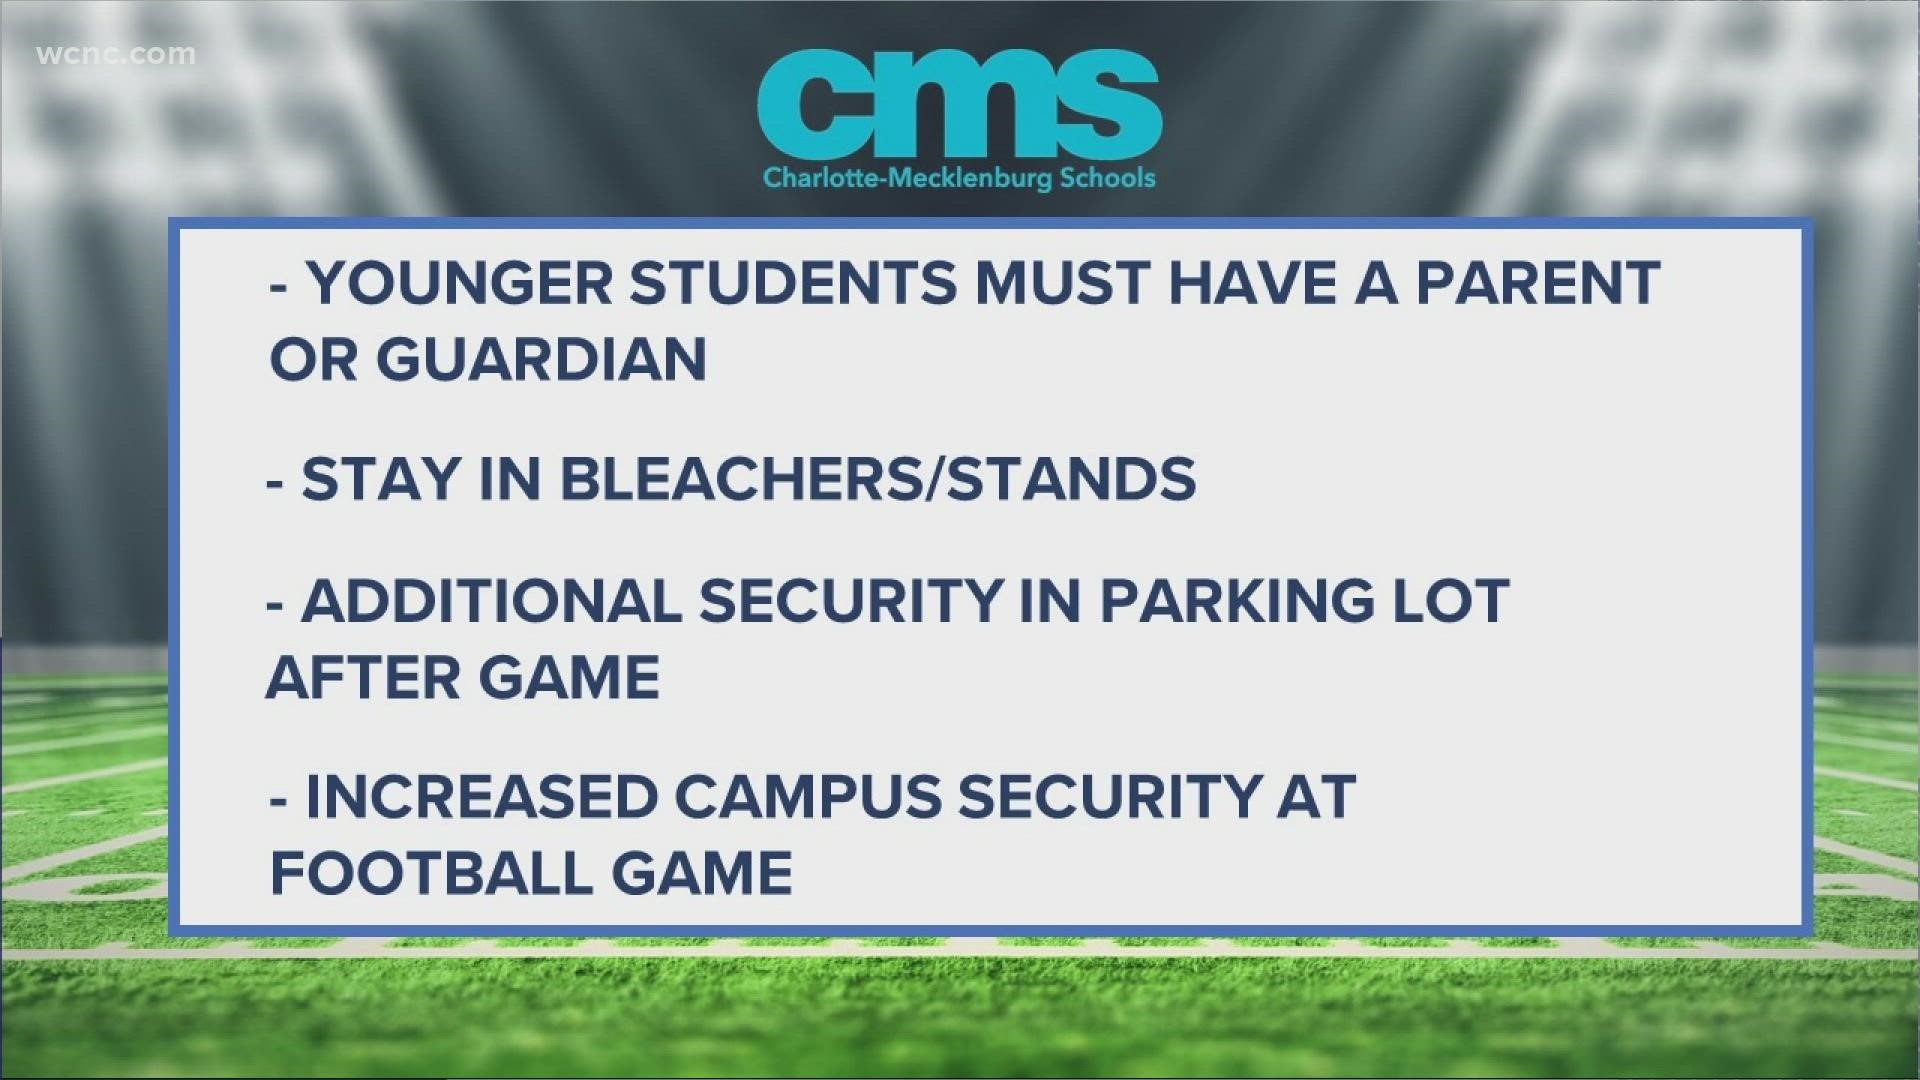 Last week, the Chambers High School football game was disrupted by gunshots nearby. Four high schools had online threats this week.